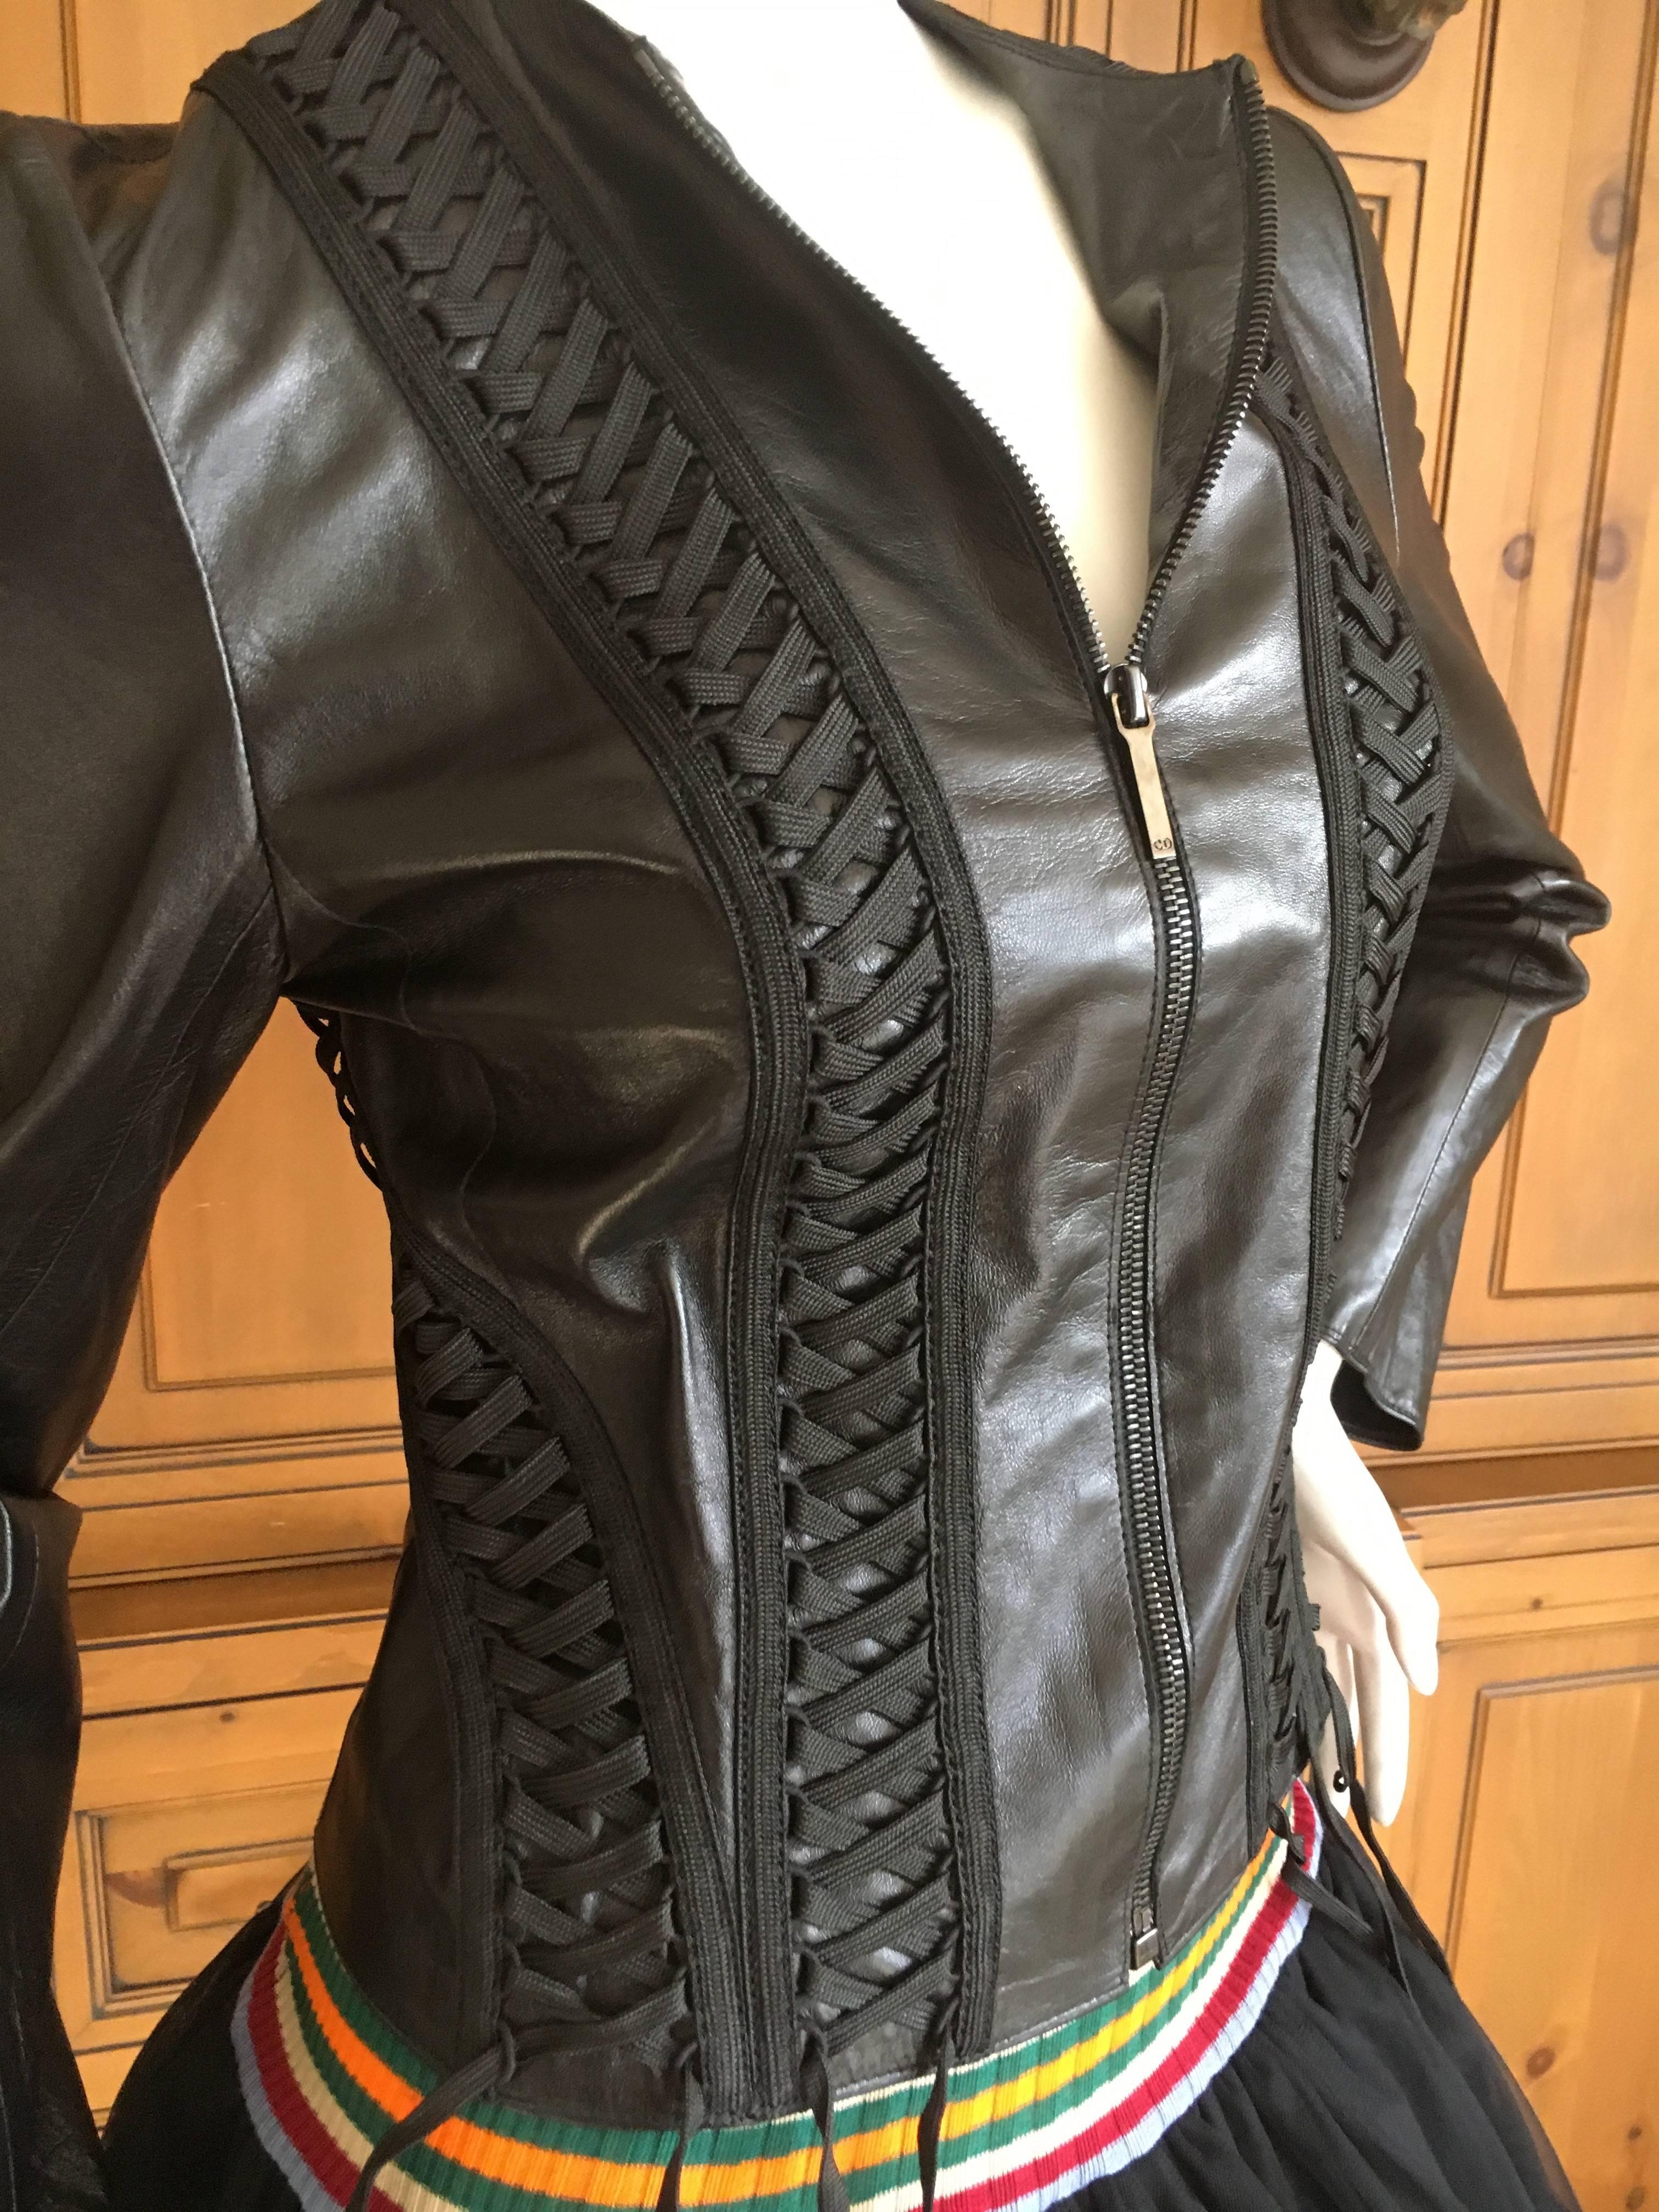 Christian Dior Black Lambskin Leather Corset Laced Bondage Jacket by Galliano For Sale 1